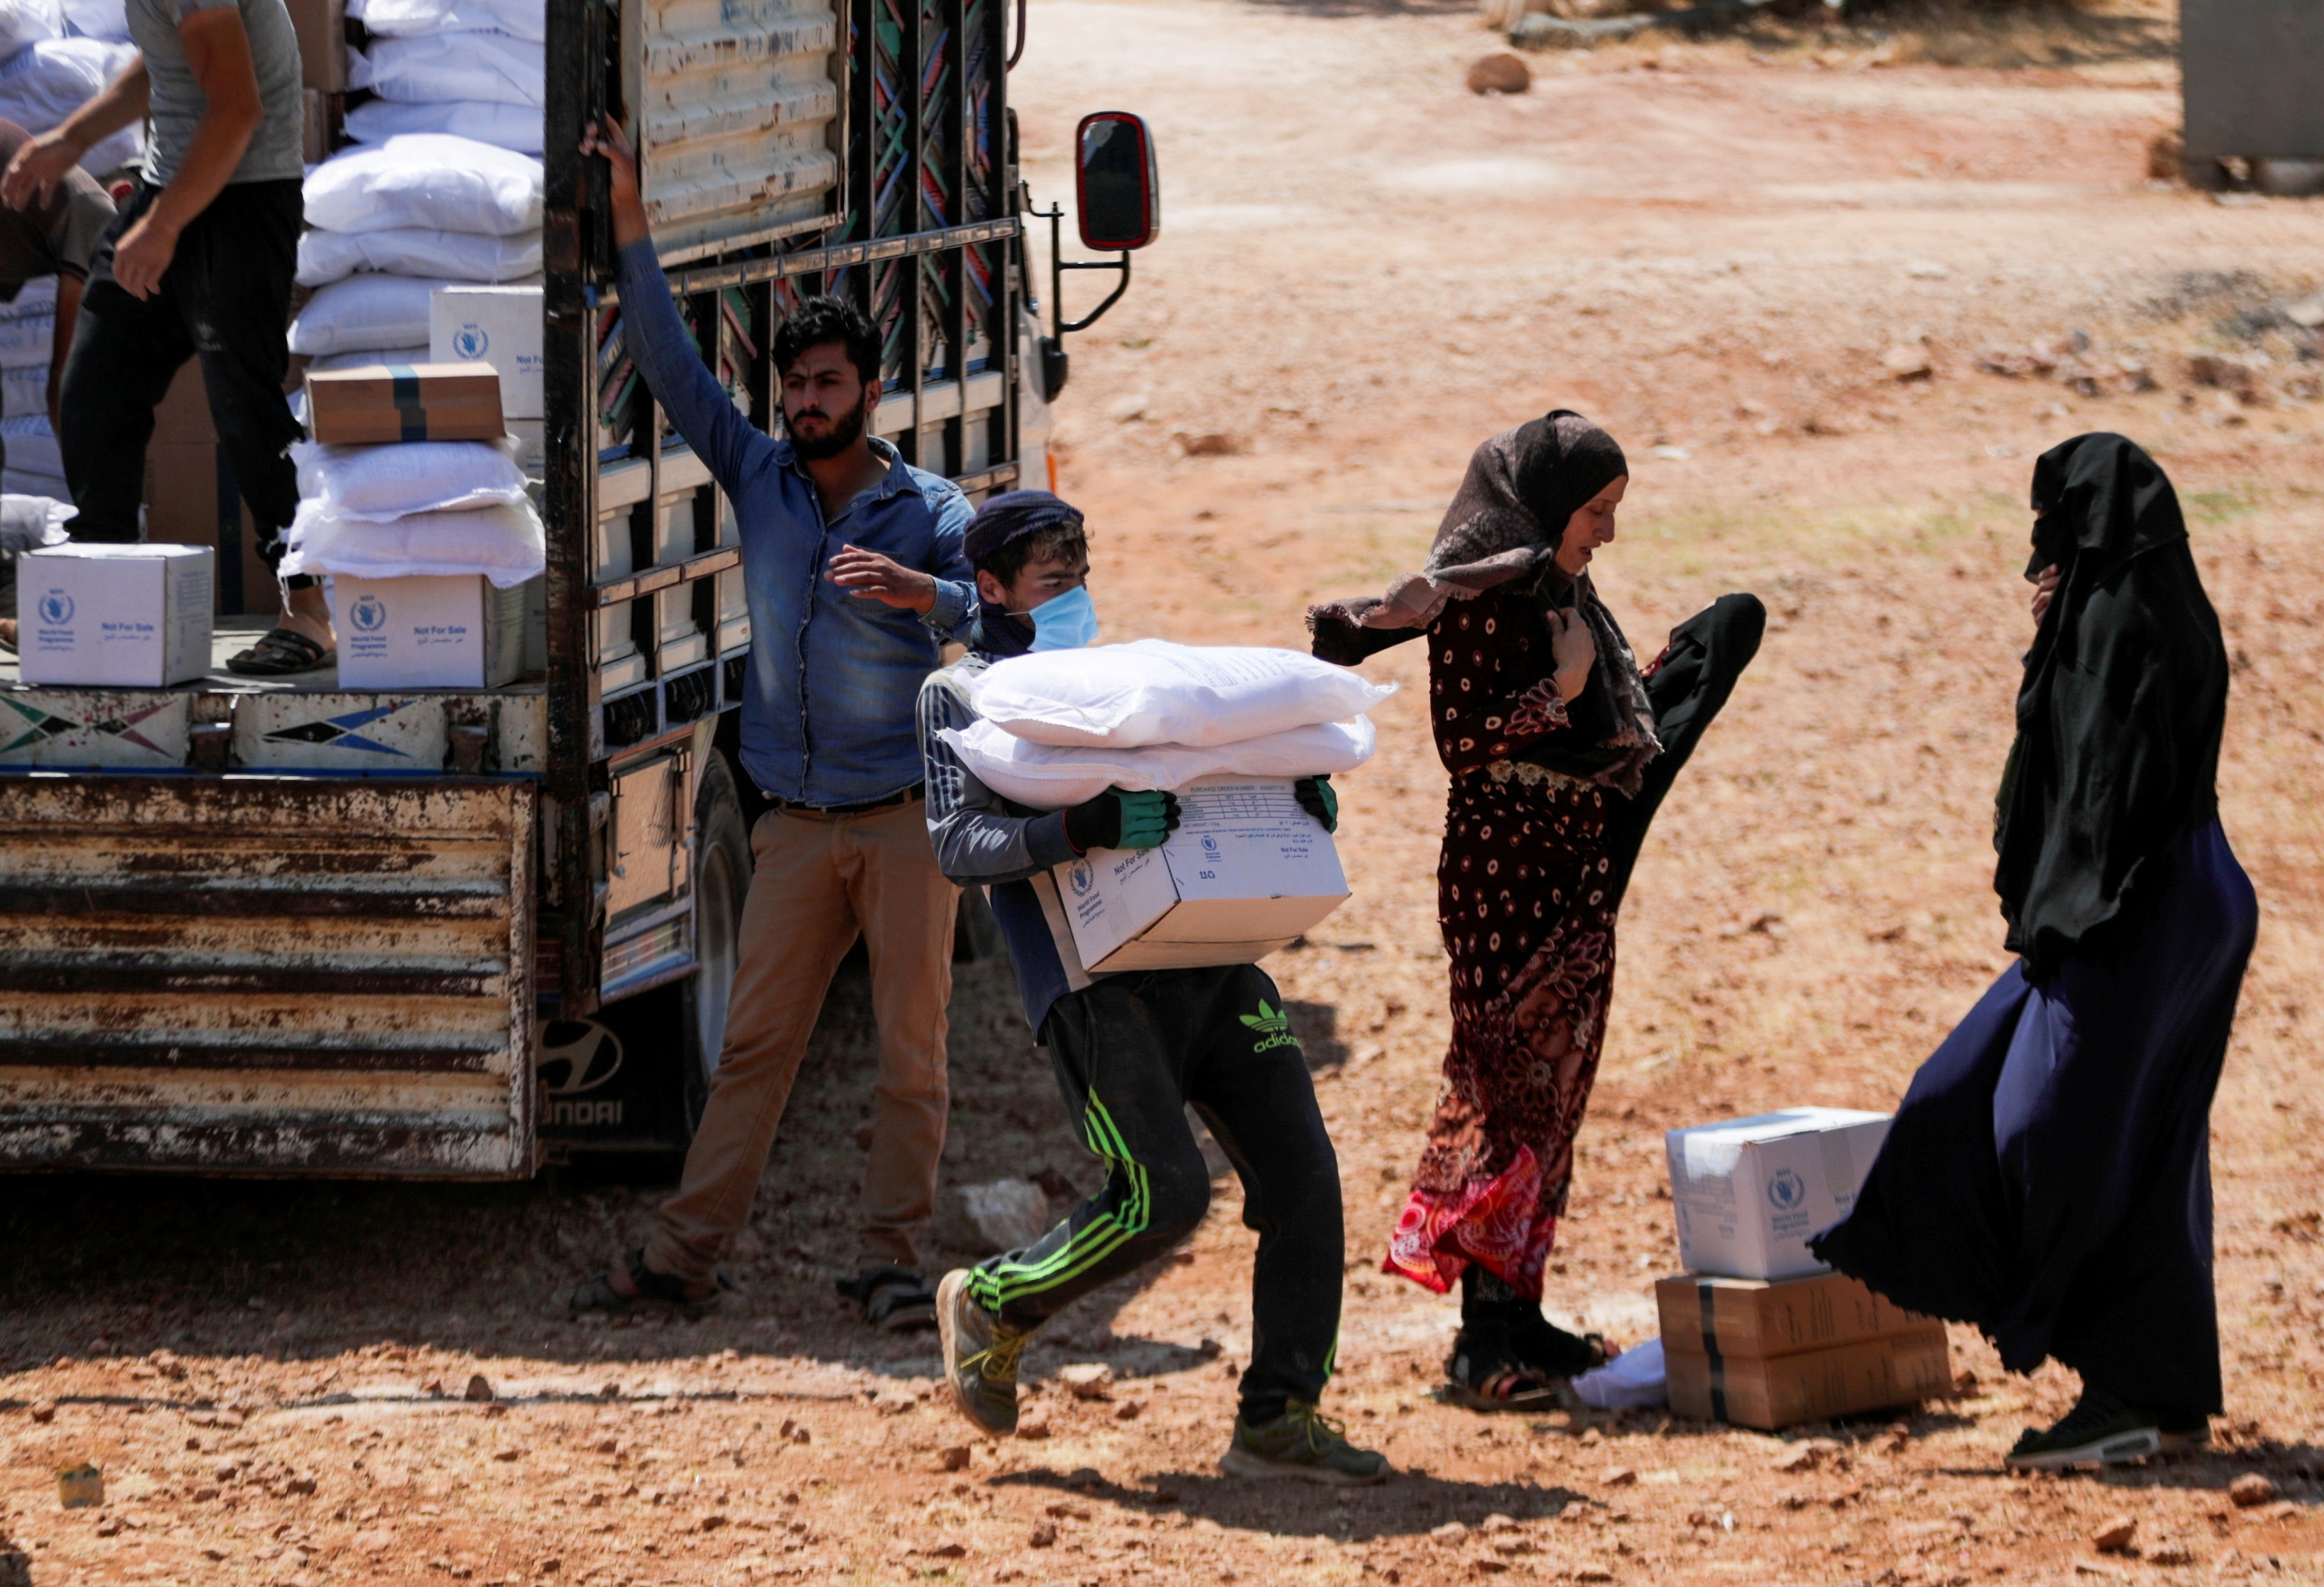 The Bab al-Hawa crossing is currently the sole lifeline for millions of people in Syria's northwest who live in areas outside government control